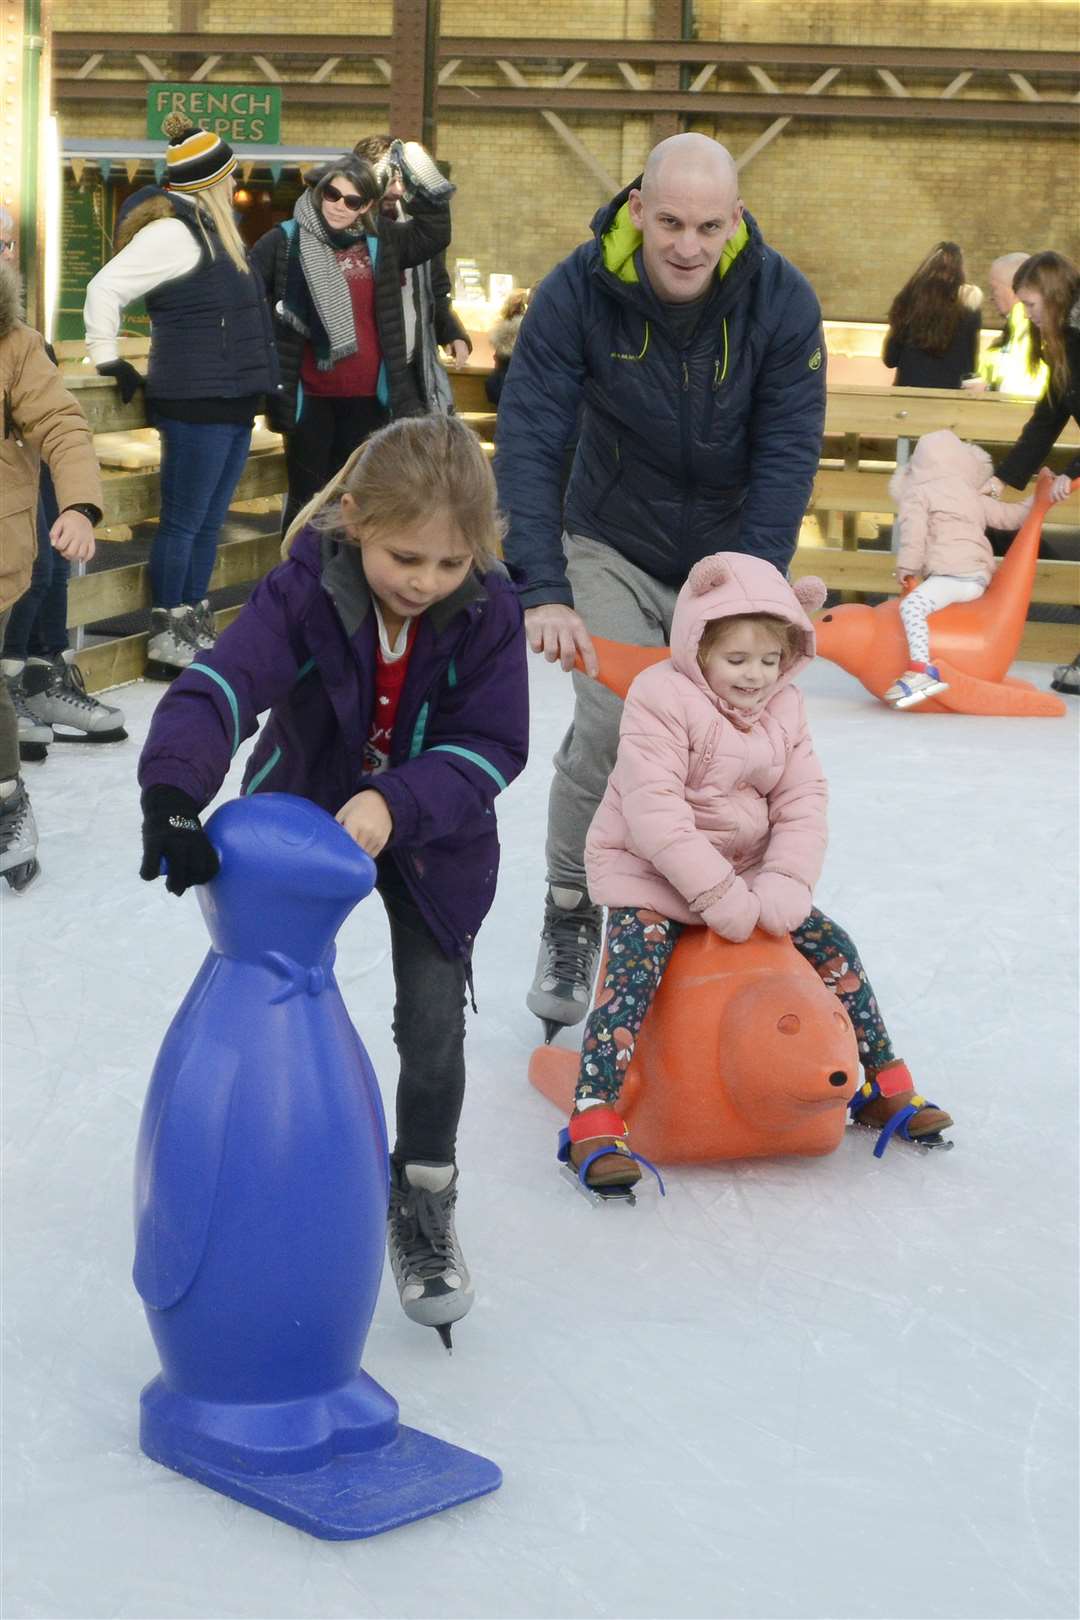 On the popular skating rink during the last Port of Dover White Cliffs Christmas, November 2019